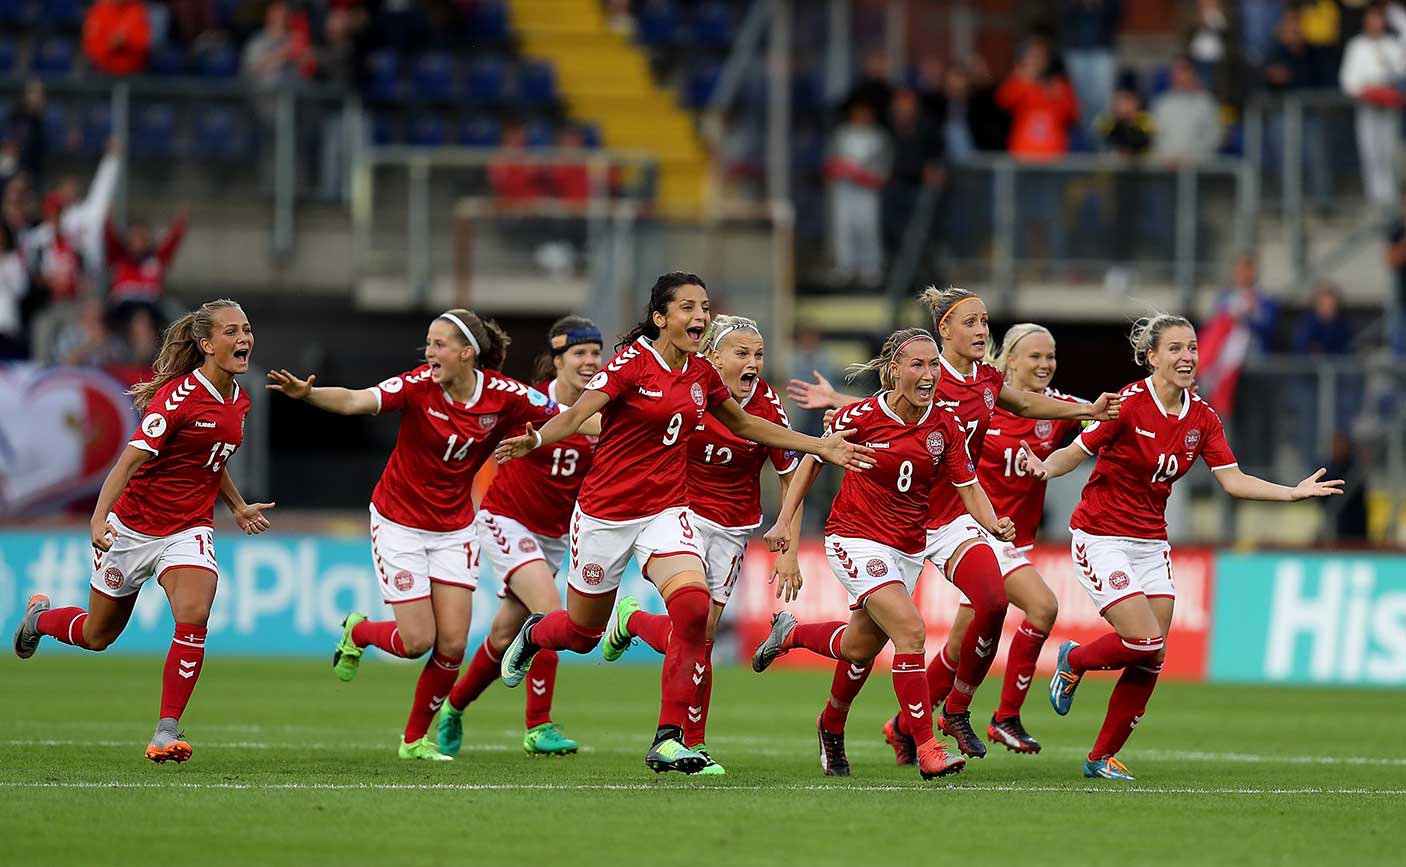 Denmark players celebrate their team's victory during the UEFA Women's Euro 2017 Semi Final